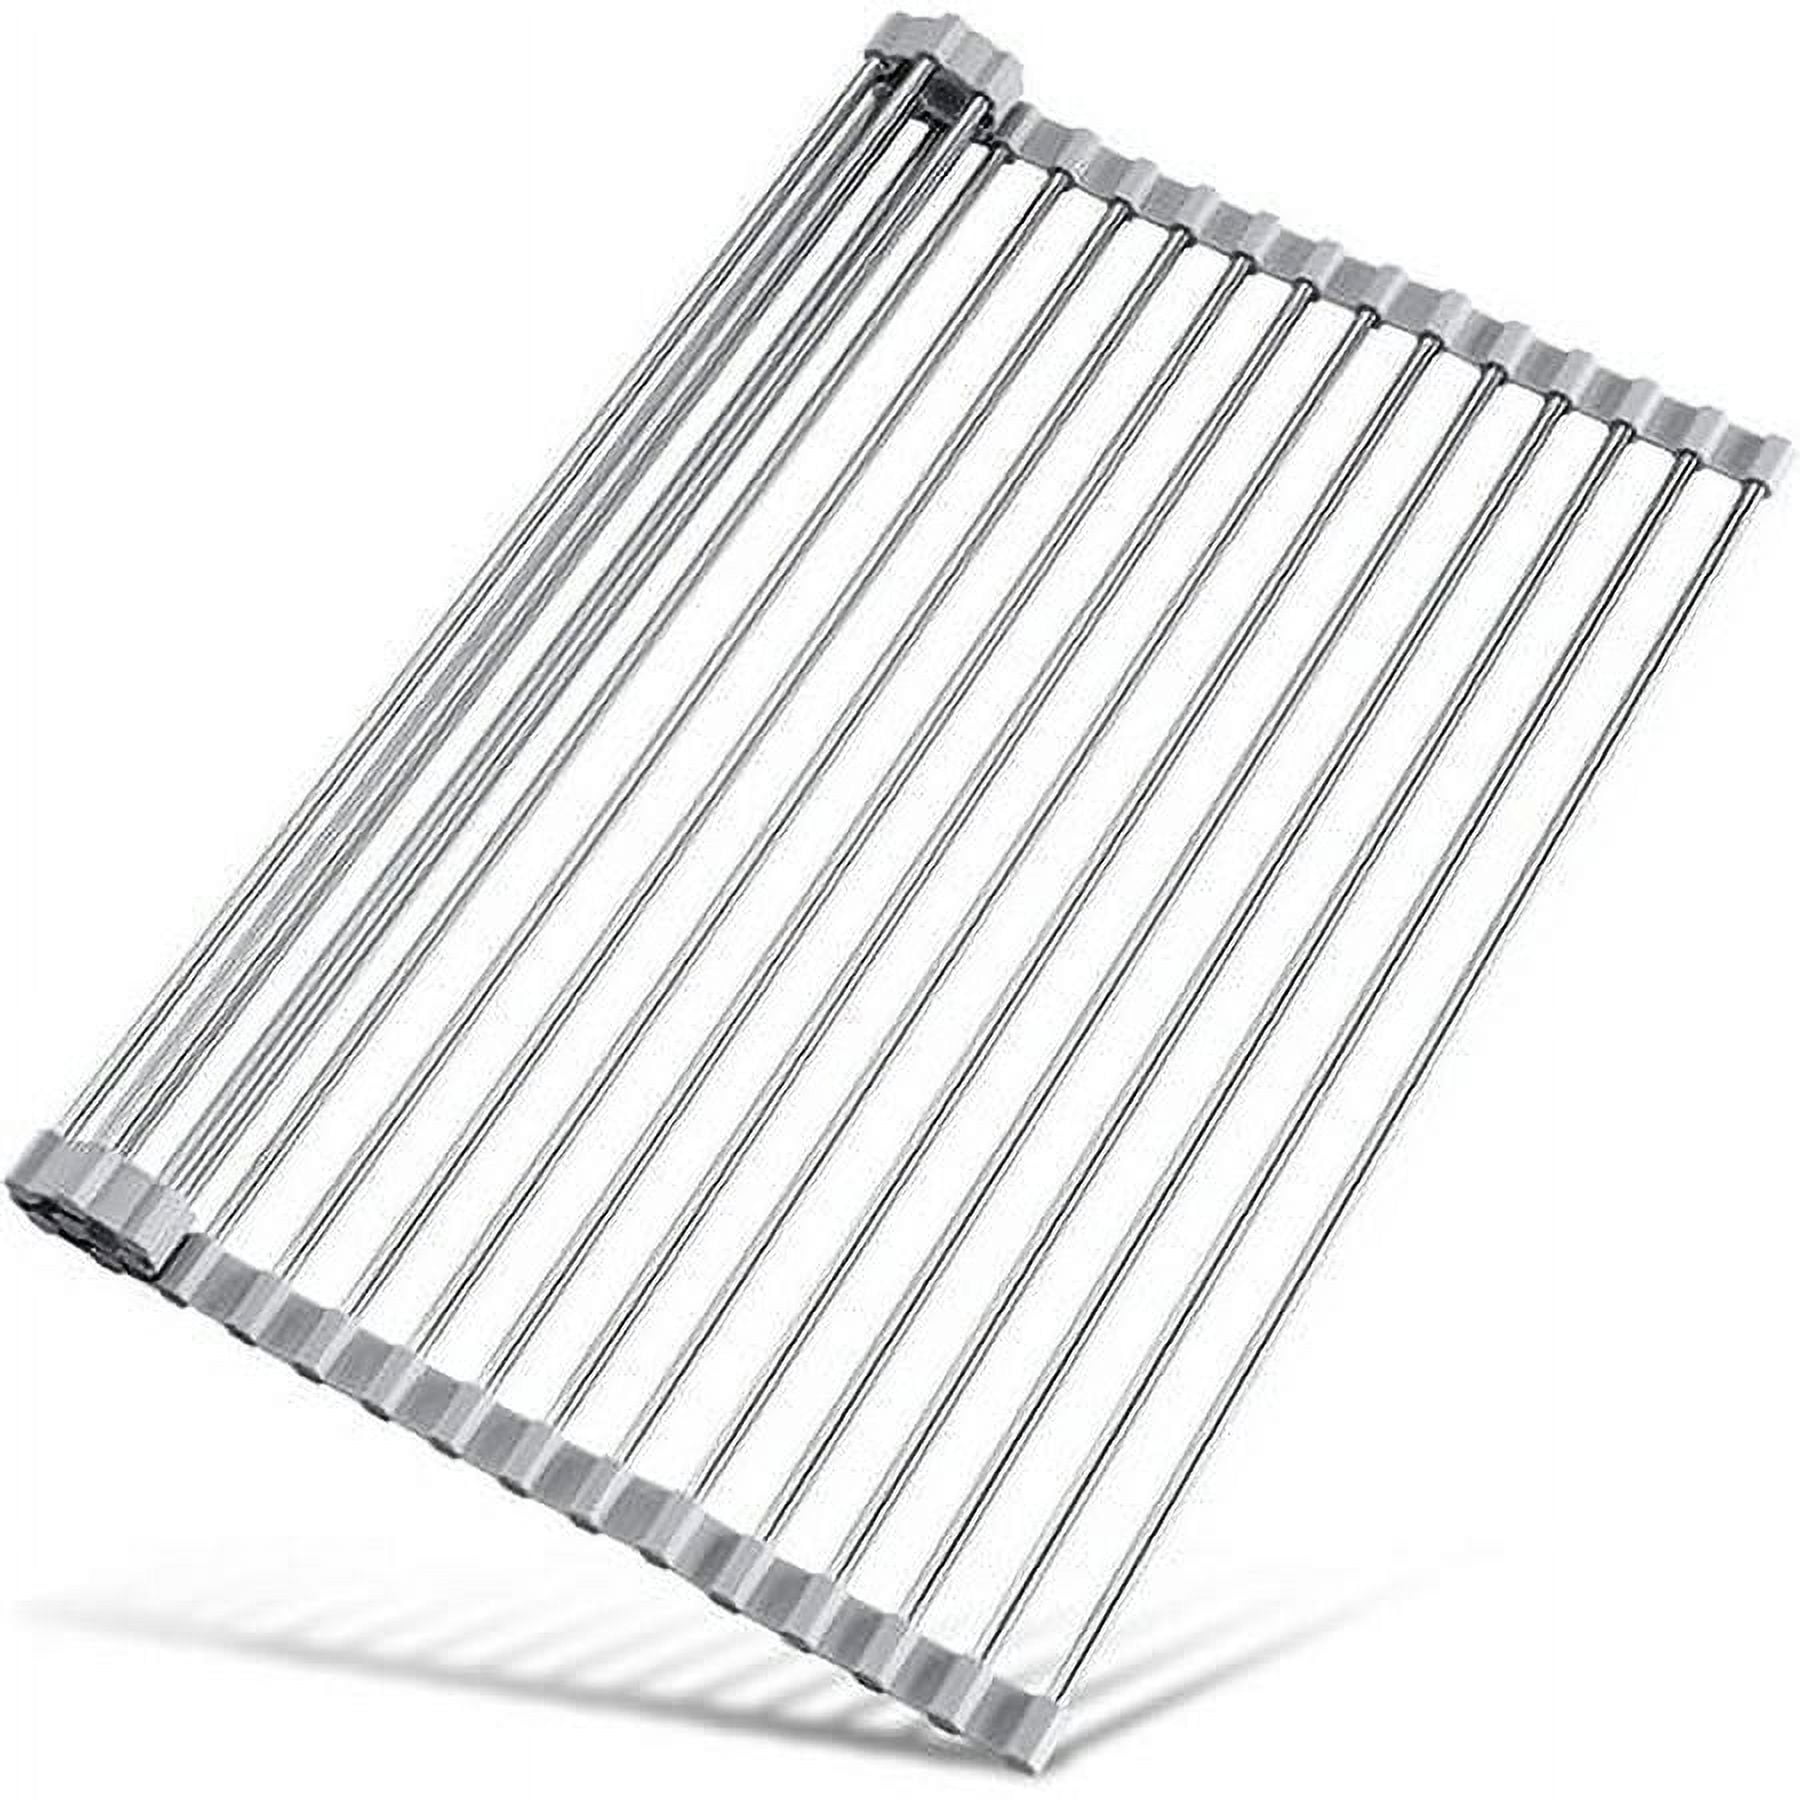 LIMNUO 20.5 x 13.2 Roll Up Dish Drying Rack, ,Silicone Wrapped Steel  Foldable Dish Drying Rack,Gray